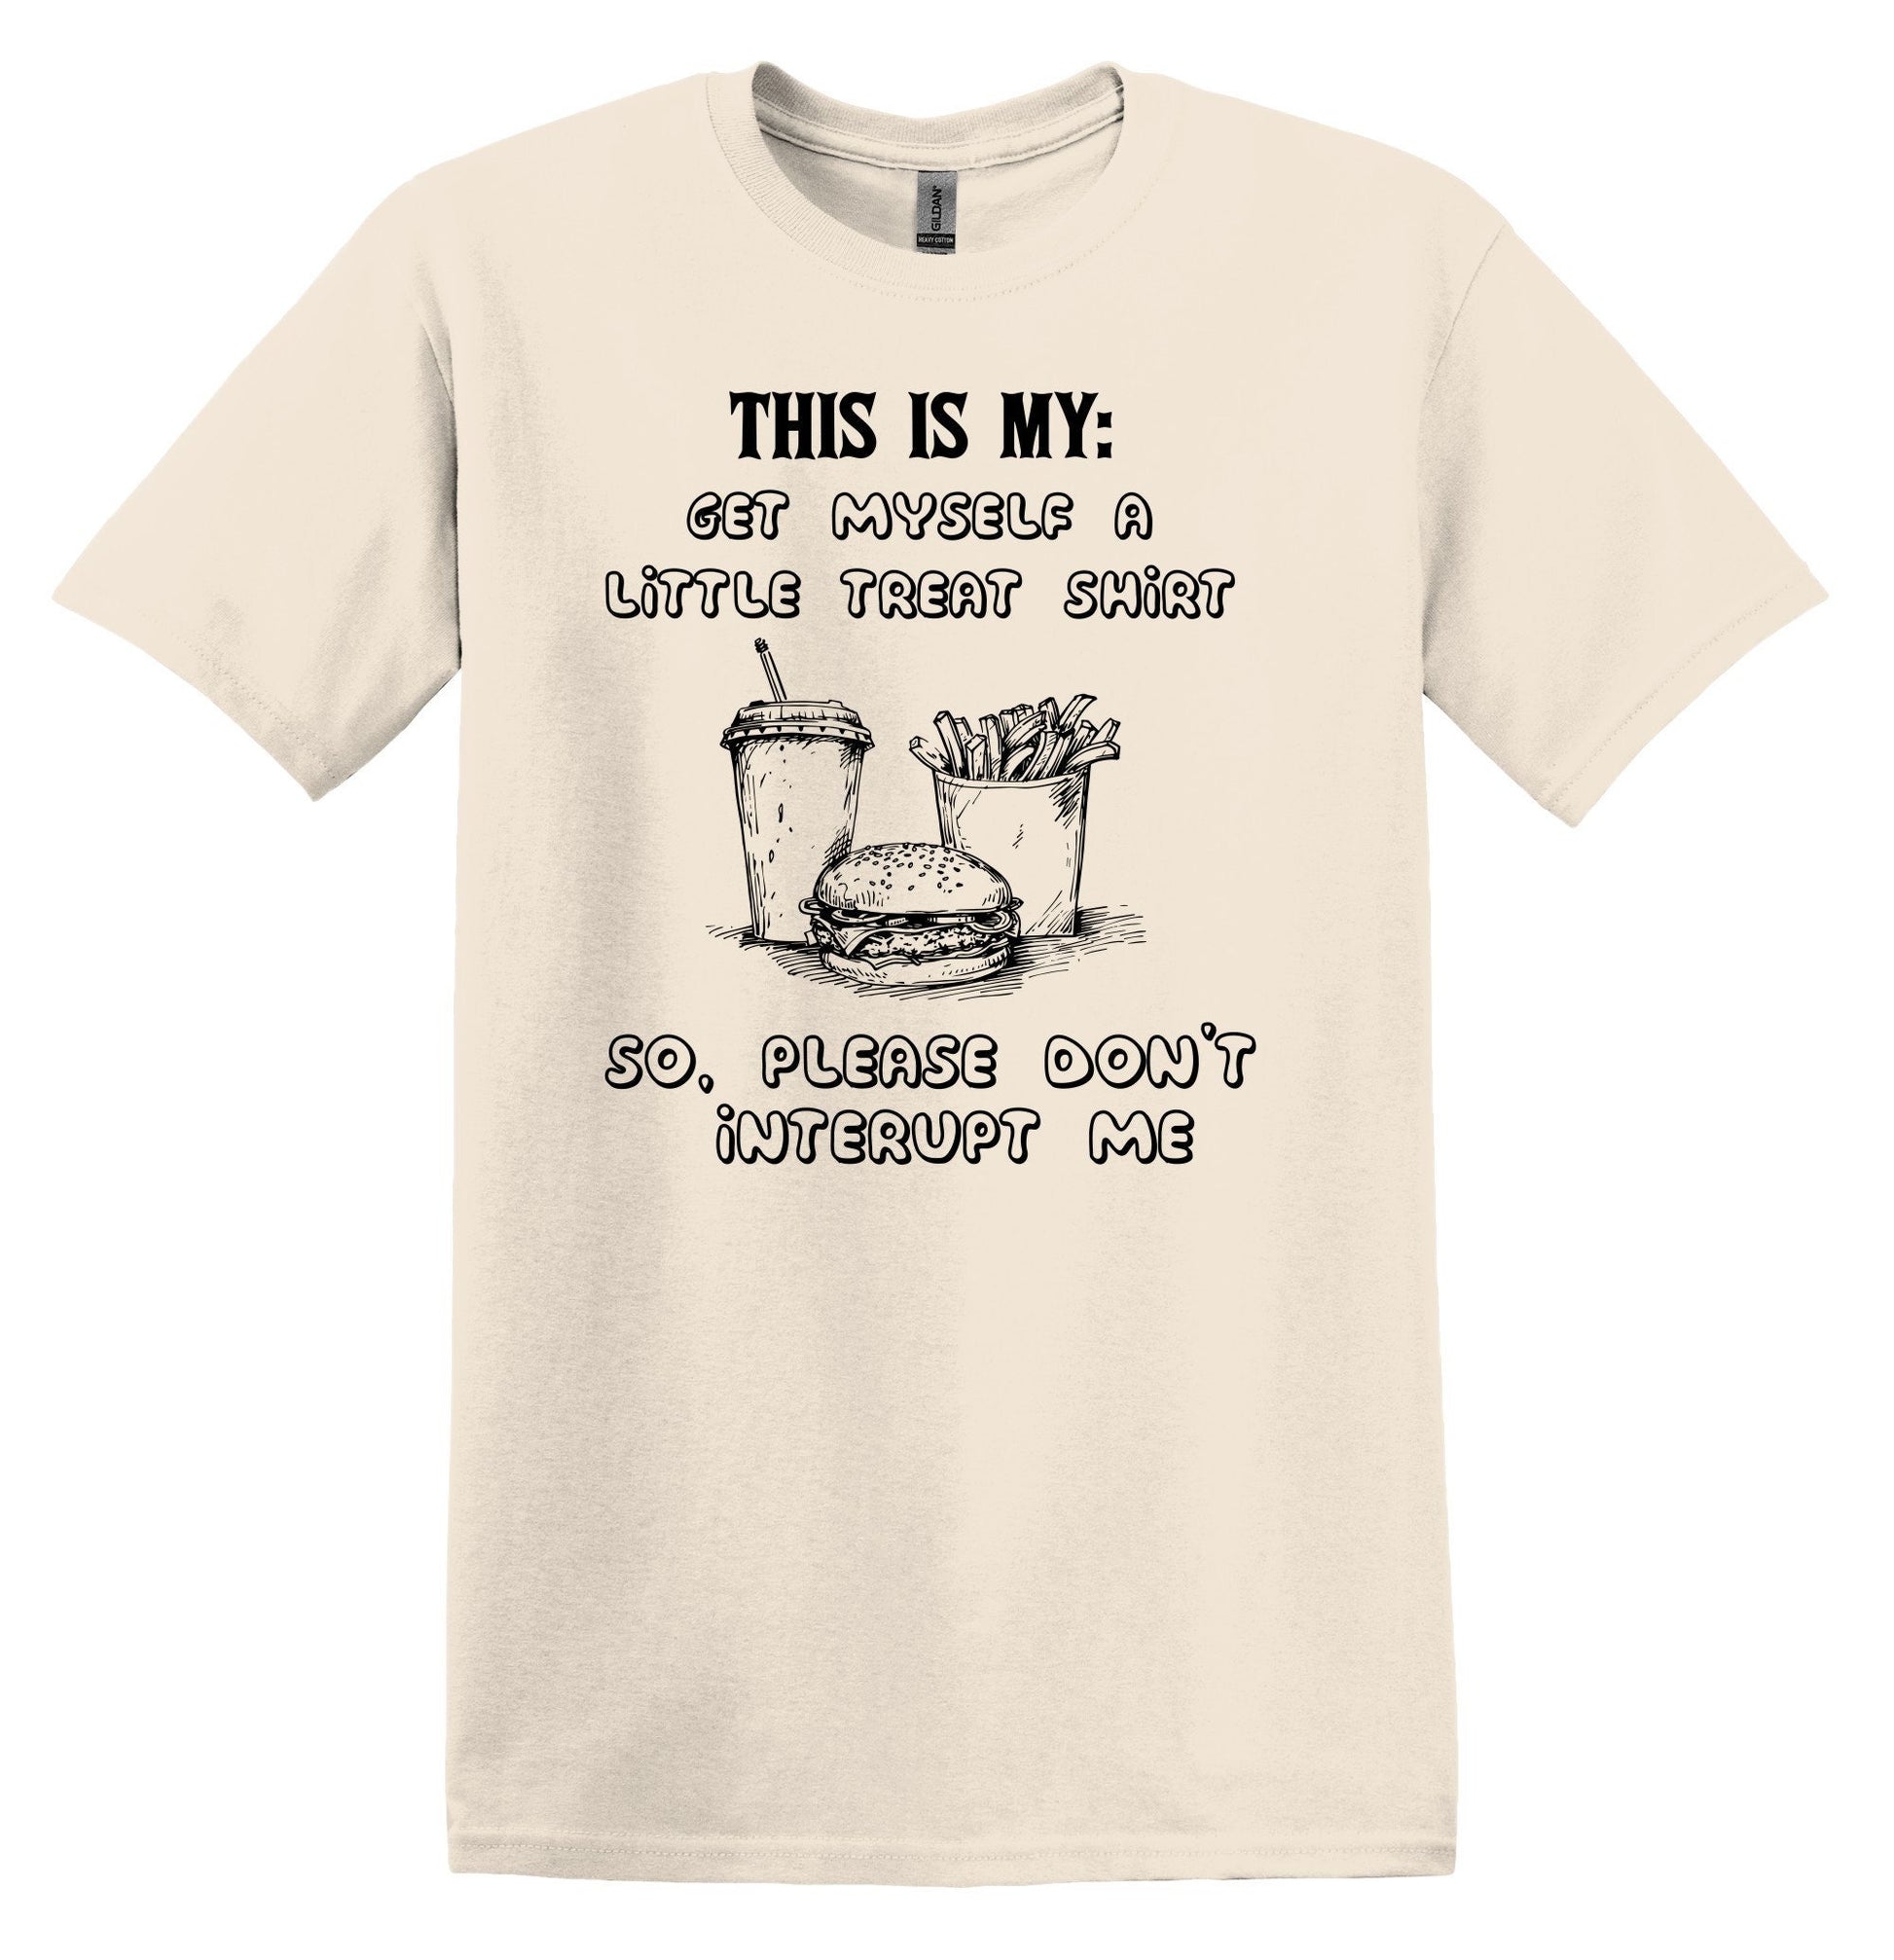 This is My: Get myself another Trreat Shirt Shirt - Funny Graphic Tee